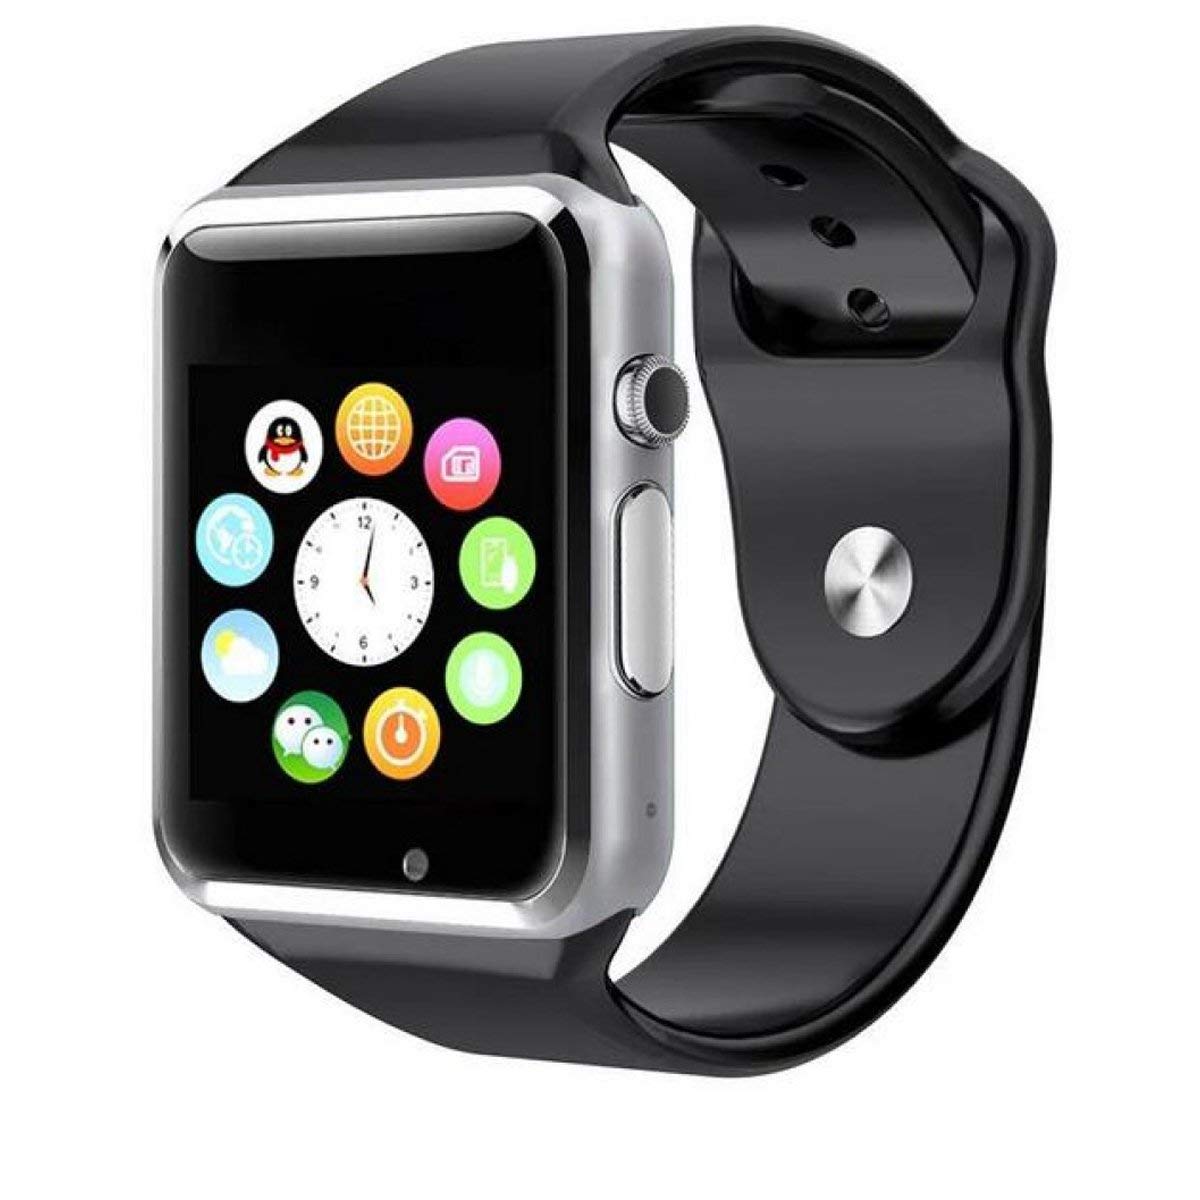 A1 Bluetooth Smart Watch under rs 1000 in India